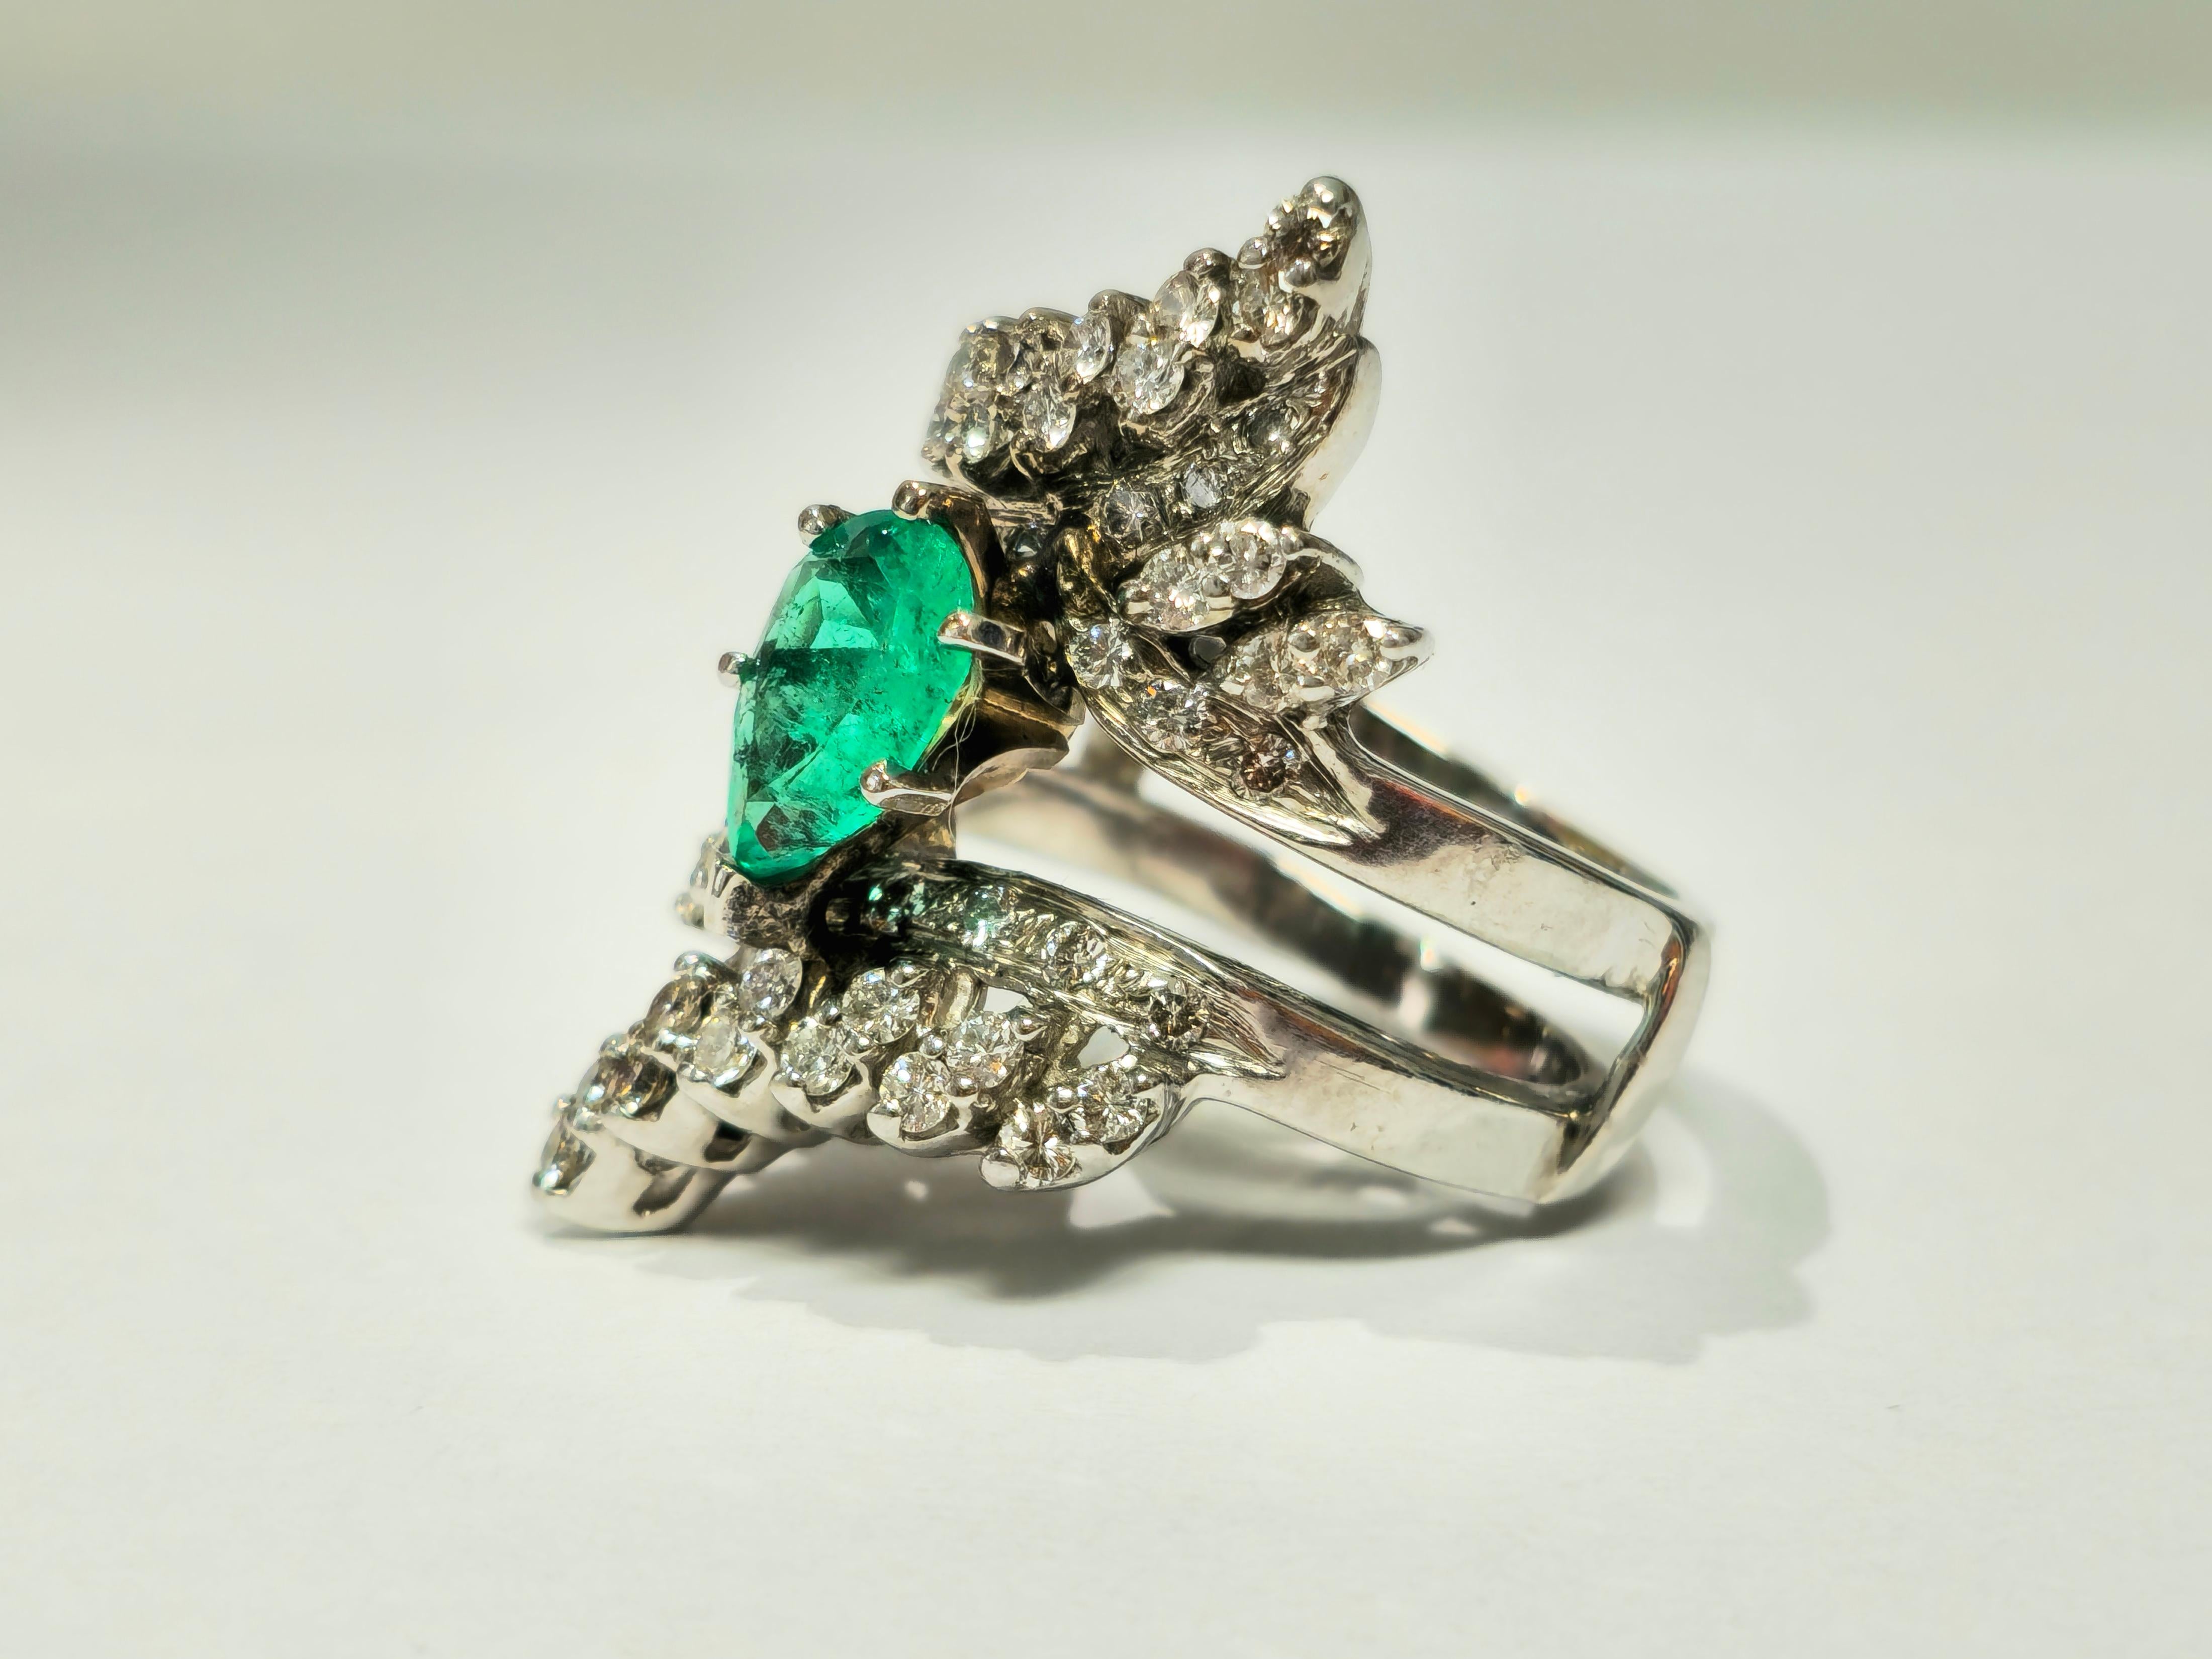 Crafted in lustrous 14k white gold, this stunning ring boasts a magnificent 3.50 carat Colombian emerald, pear-shaped and elegantly set in prongs, exuding natural beauty and allure. Complementing the emerald are brilliant diamonds totaling 2.00